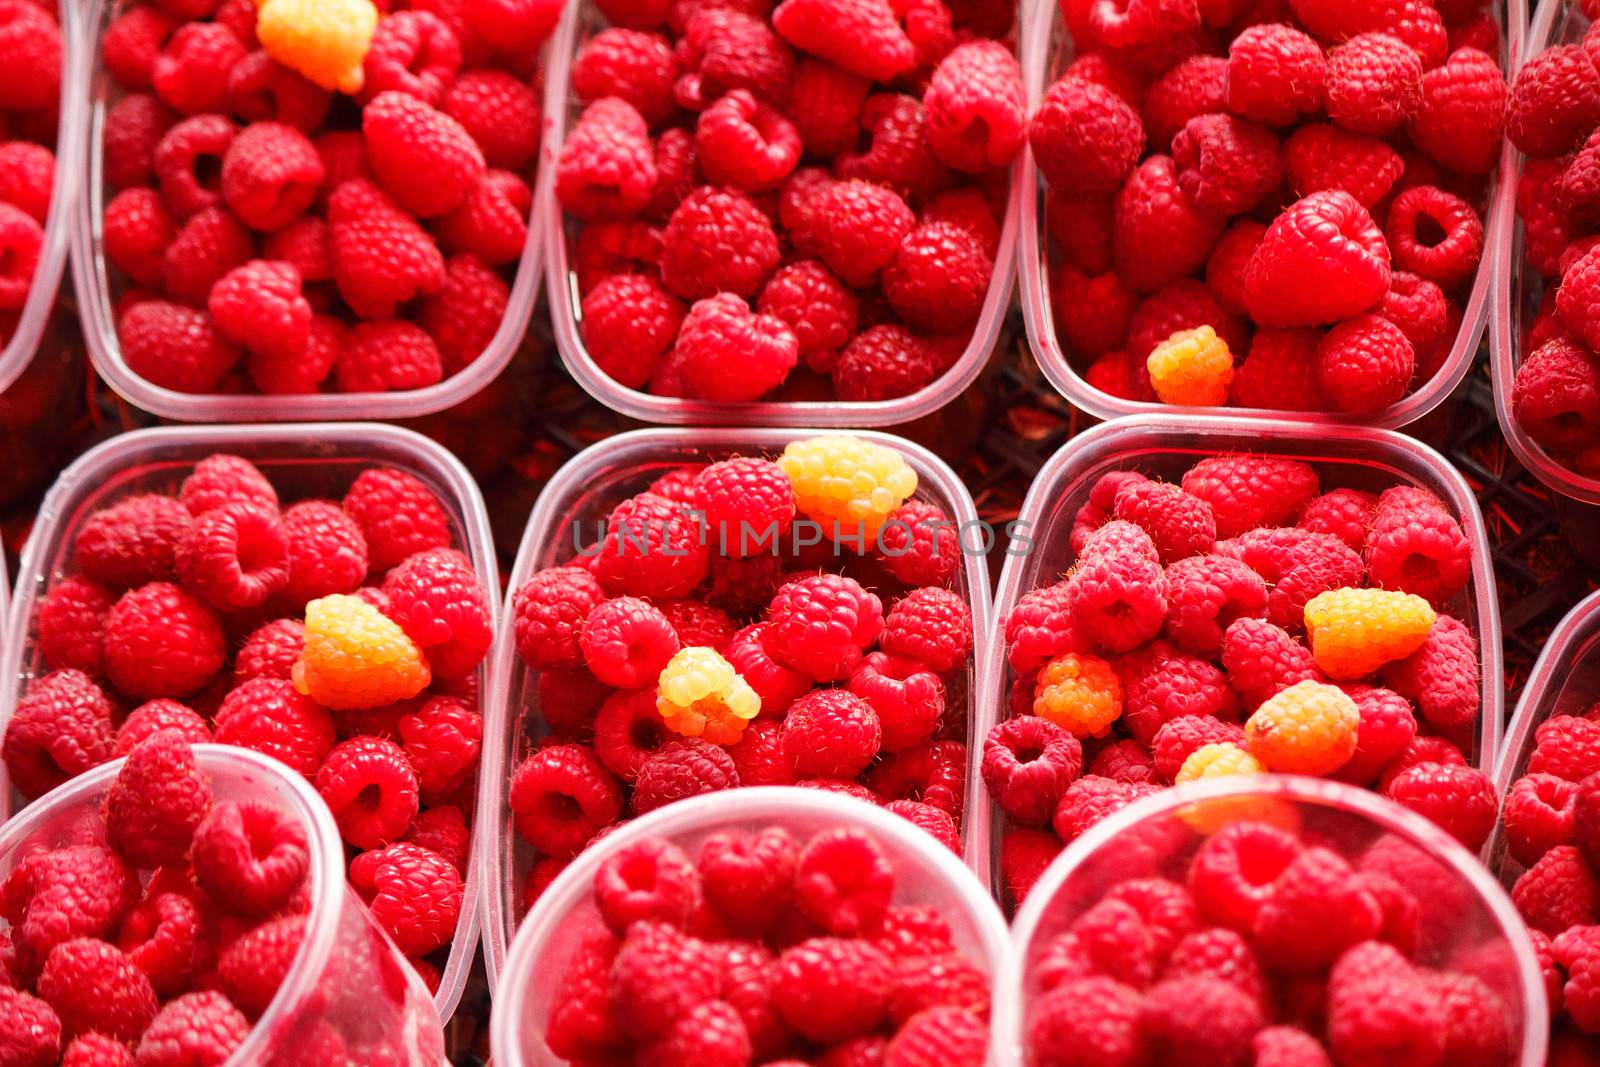 Raspberries in containers for sale. by georgina198